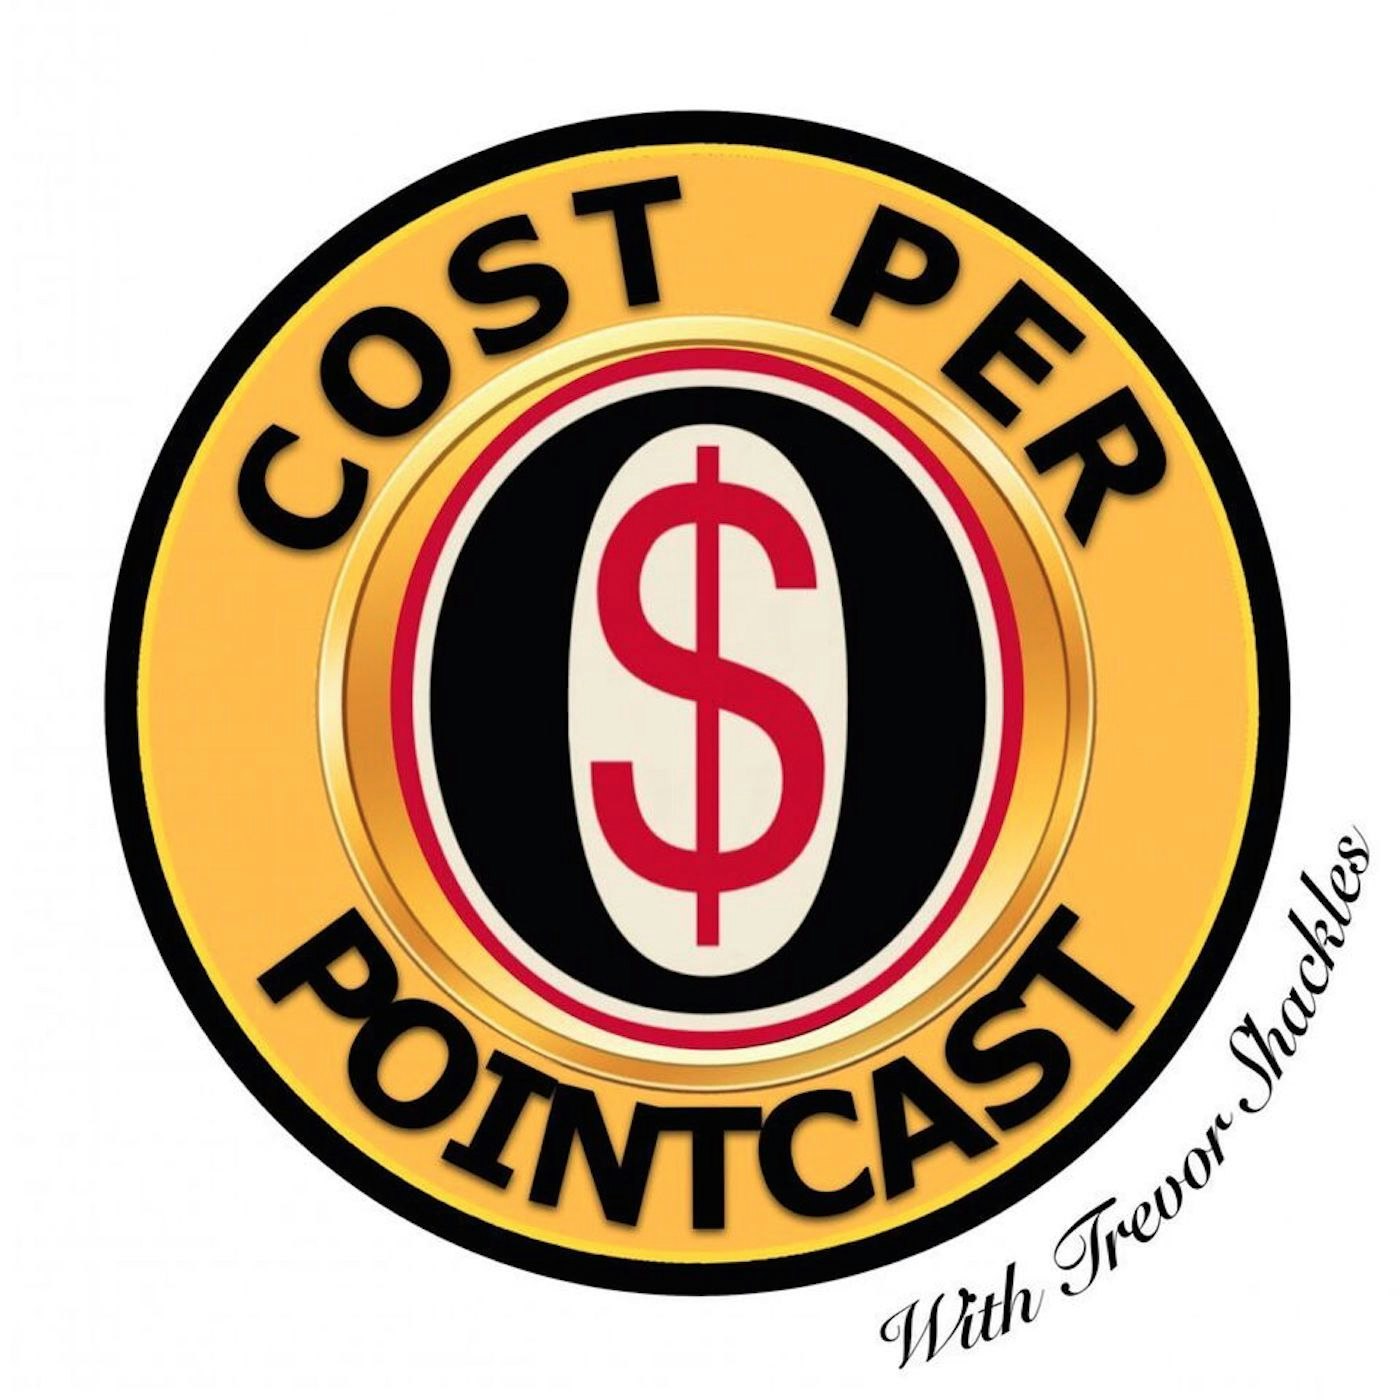 Cost Per Pointcast, Ep. 25: Will Karlsson Re-Sign? ft. Travis Yost